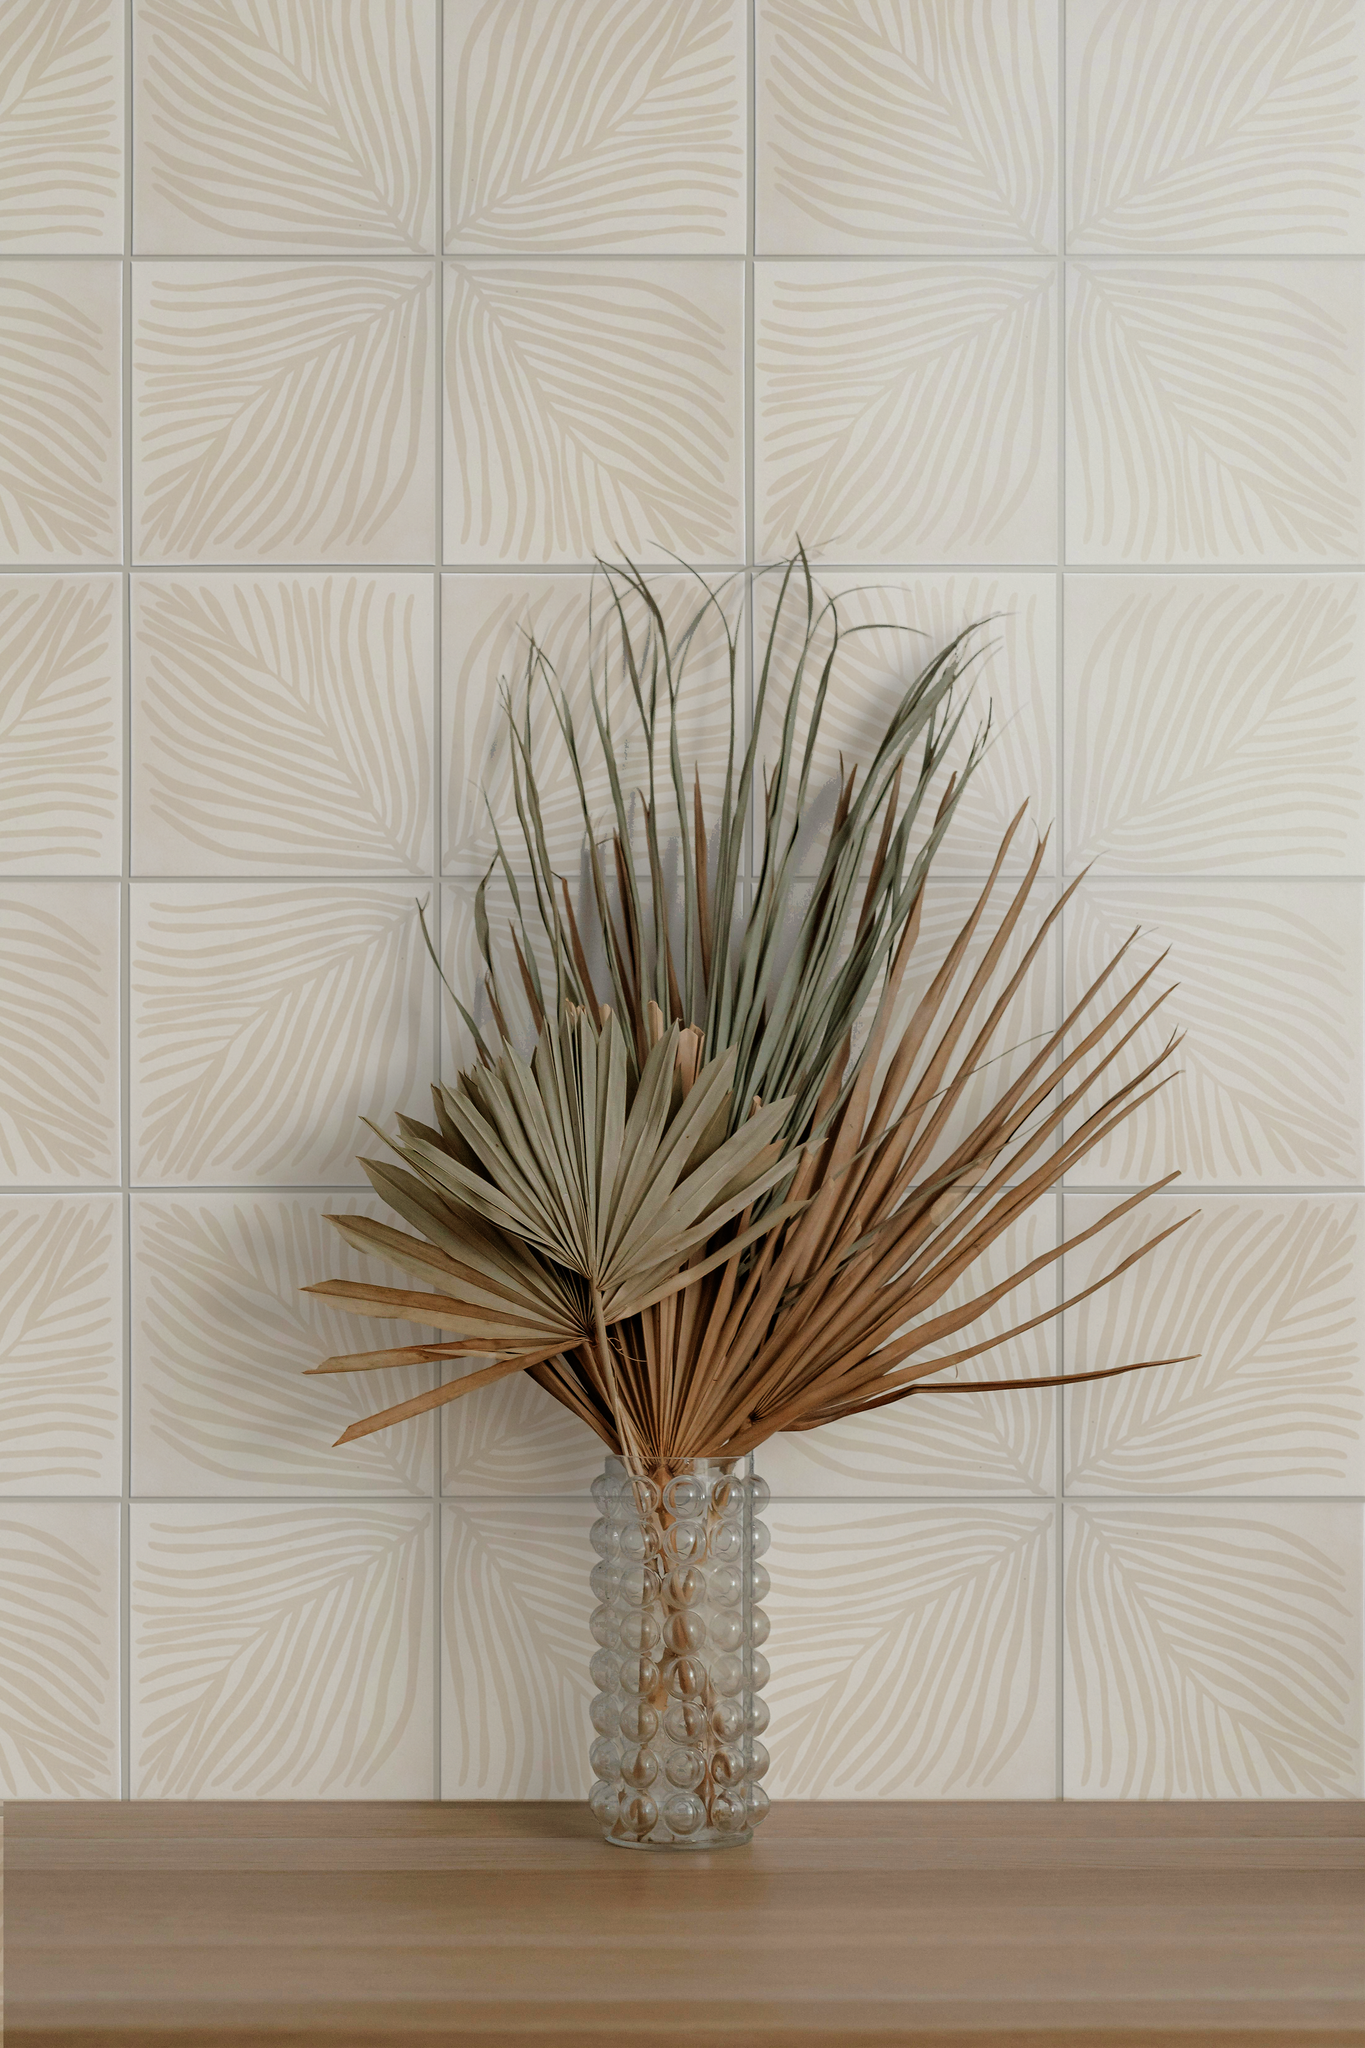 Gray and beige patterned tiles by Clay Imports